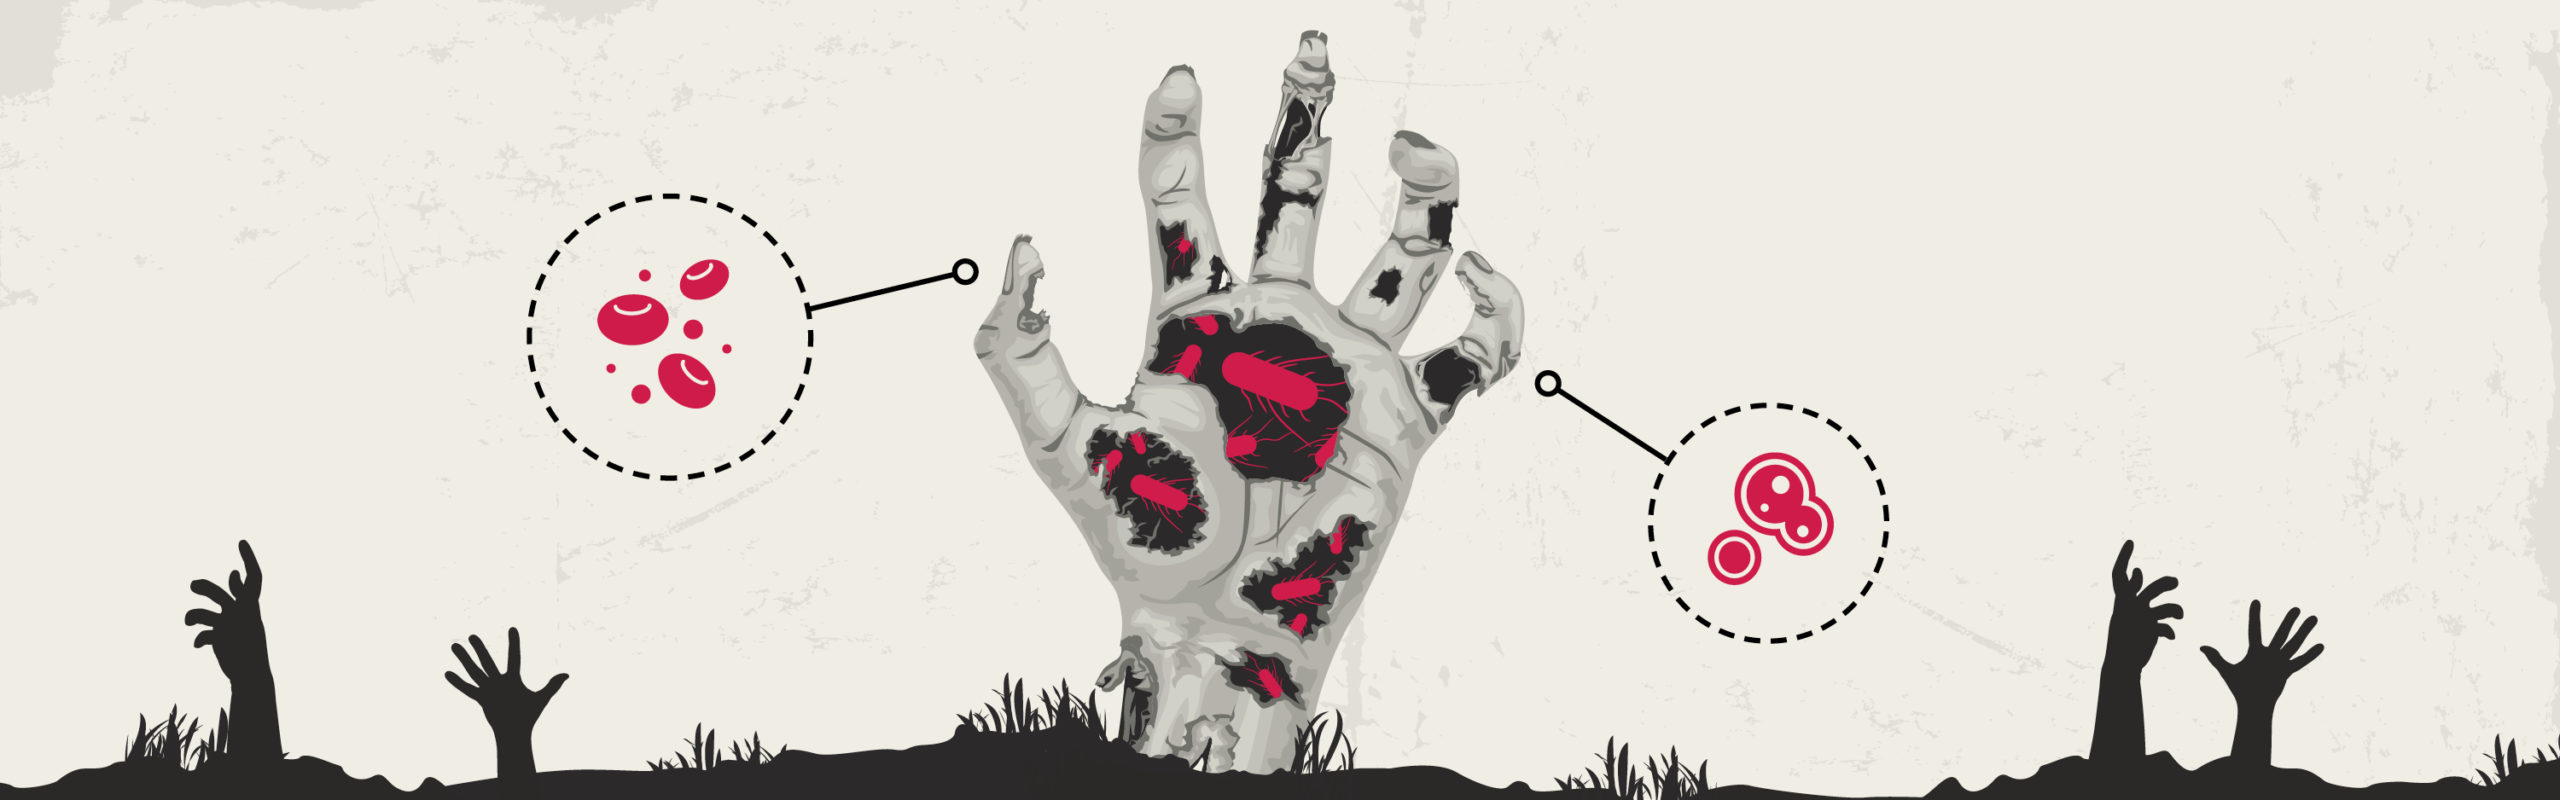 Image Description: Article banner. A comic-book style image of a zombie hand piercing through the ground. You can see catroony bacteria floating in the gaps in the skin. There are two circles that are suppose to magnify what's in the hand. Inside those circles are a cartoony image of a replicating cell and blood cells. End Description